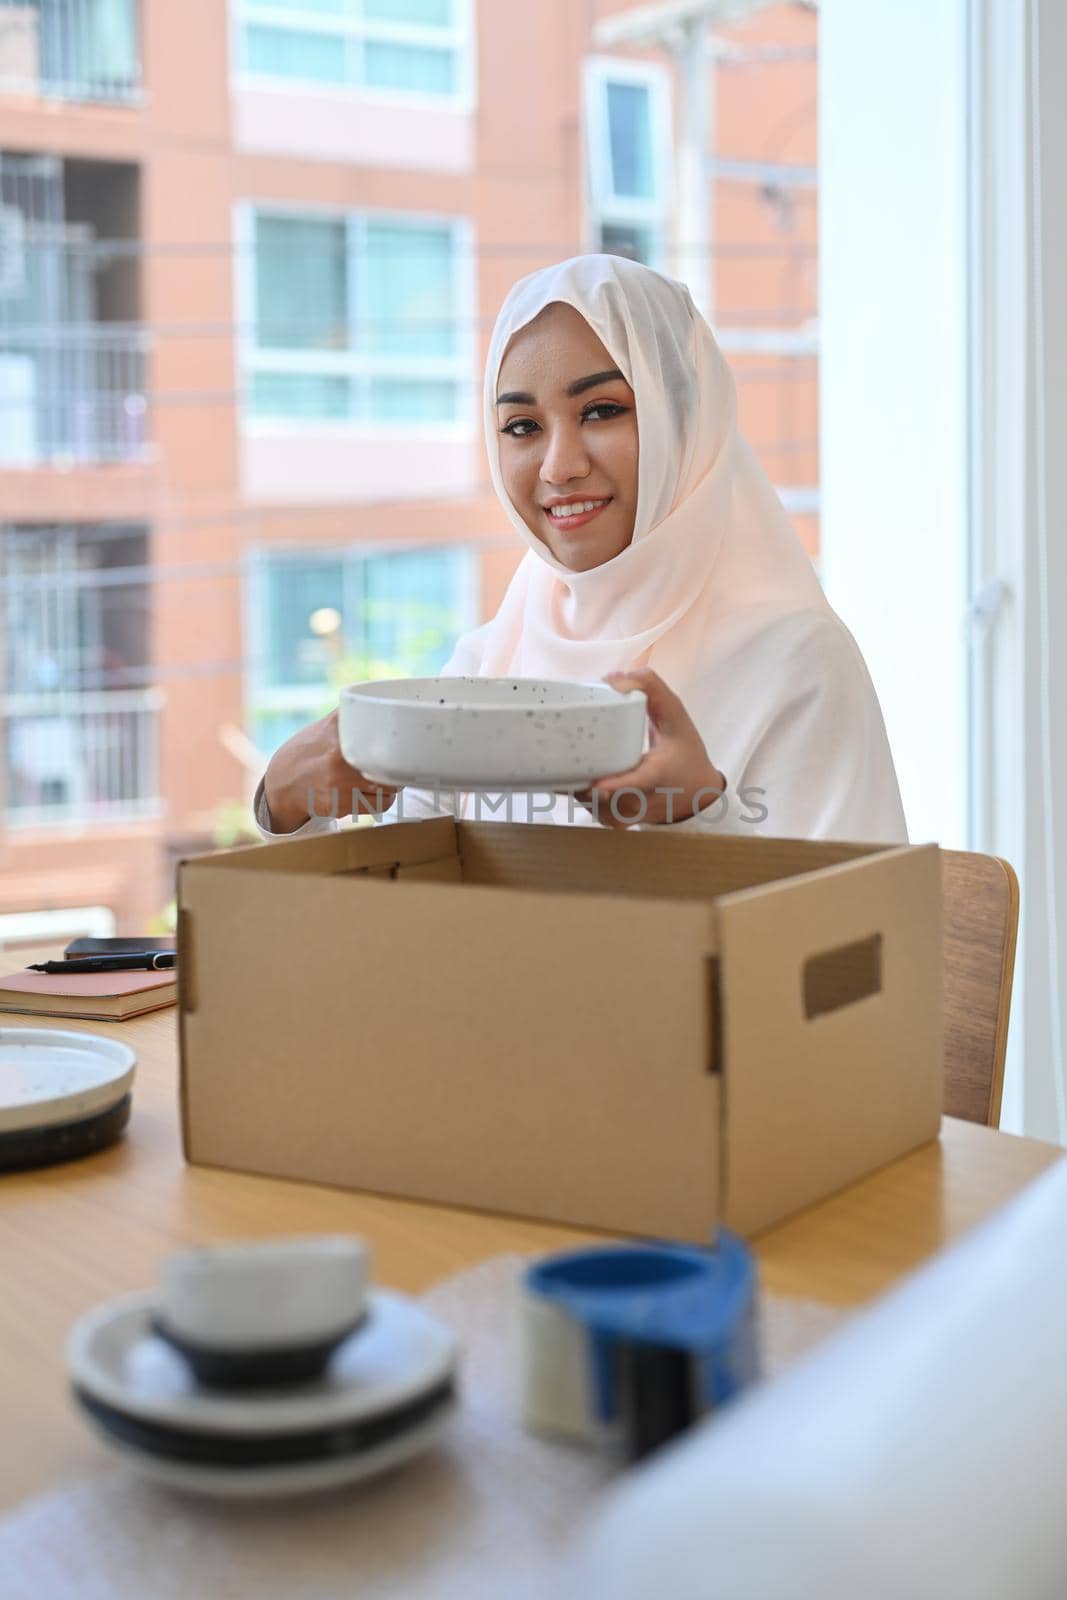 Beautiful Muslim woman in hijab preparing parcel boxes of product for shipping to customers.